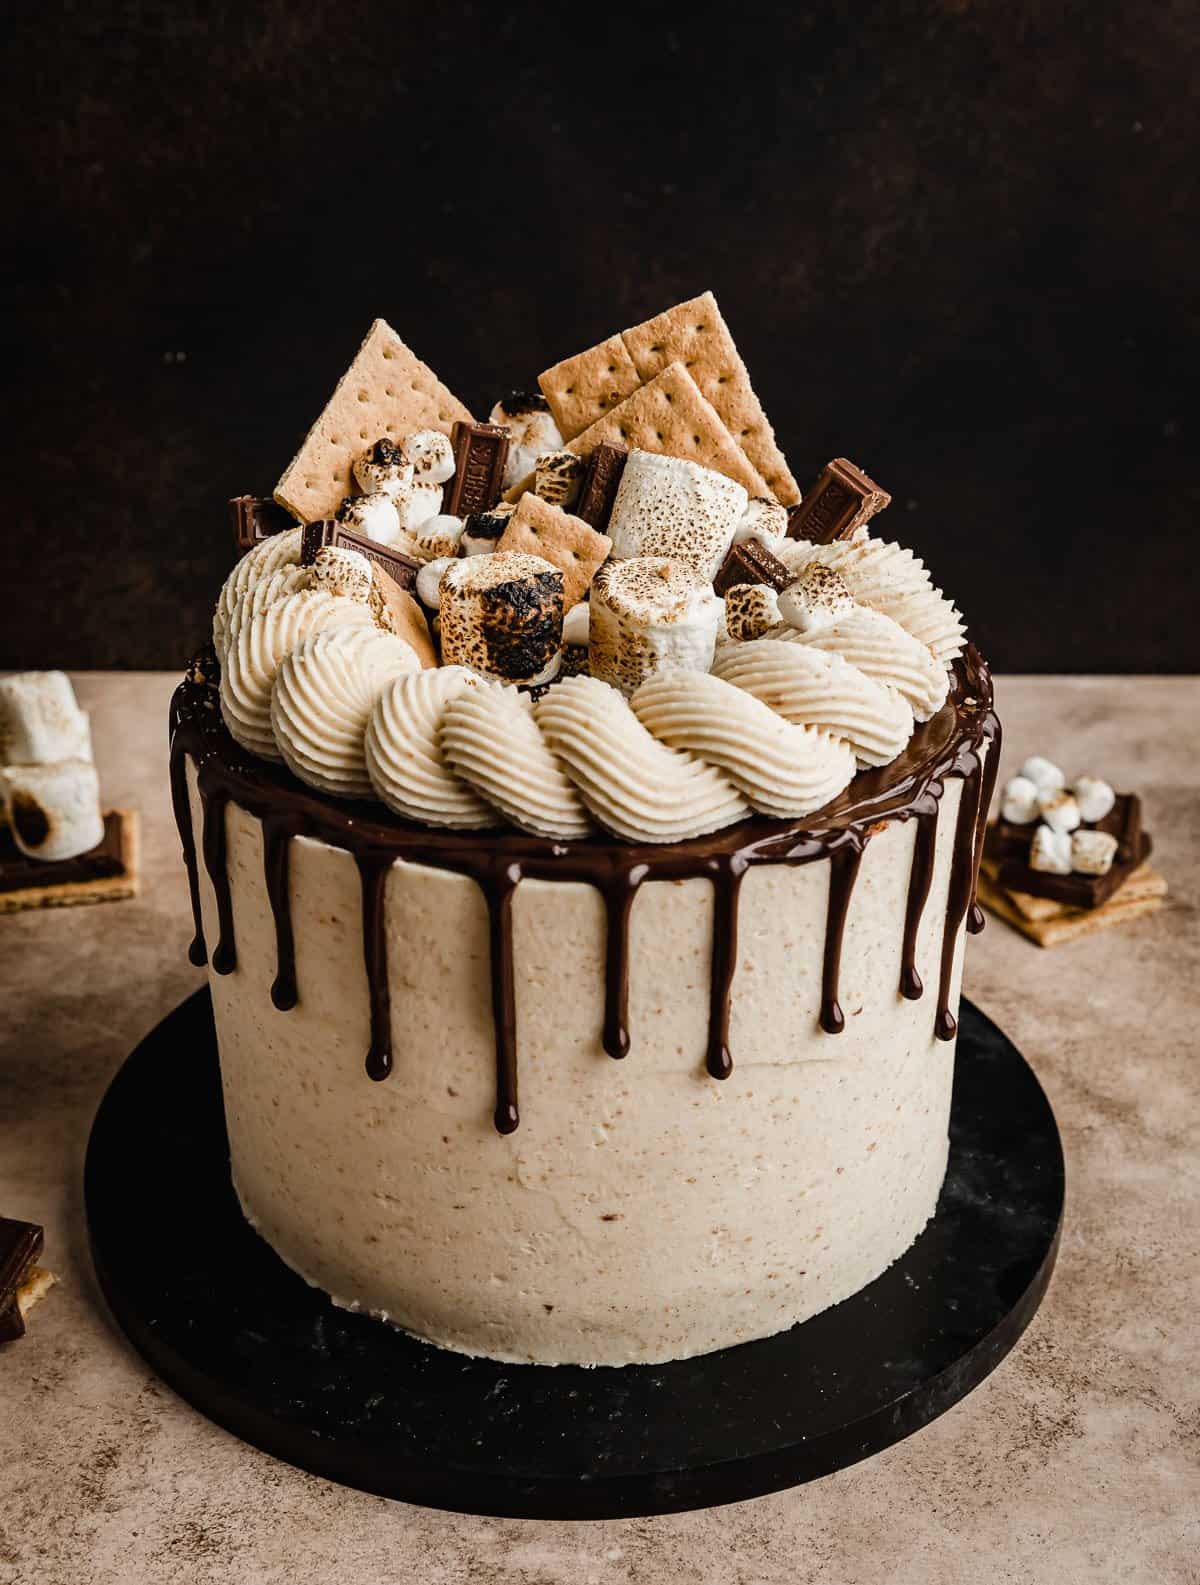 Delicious layered s'mores cake with a chocolate drip topped with graham cracker squares, toasted marshmallows and chocolate squares.